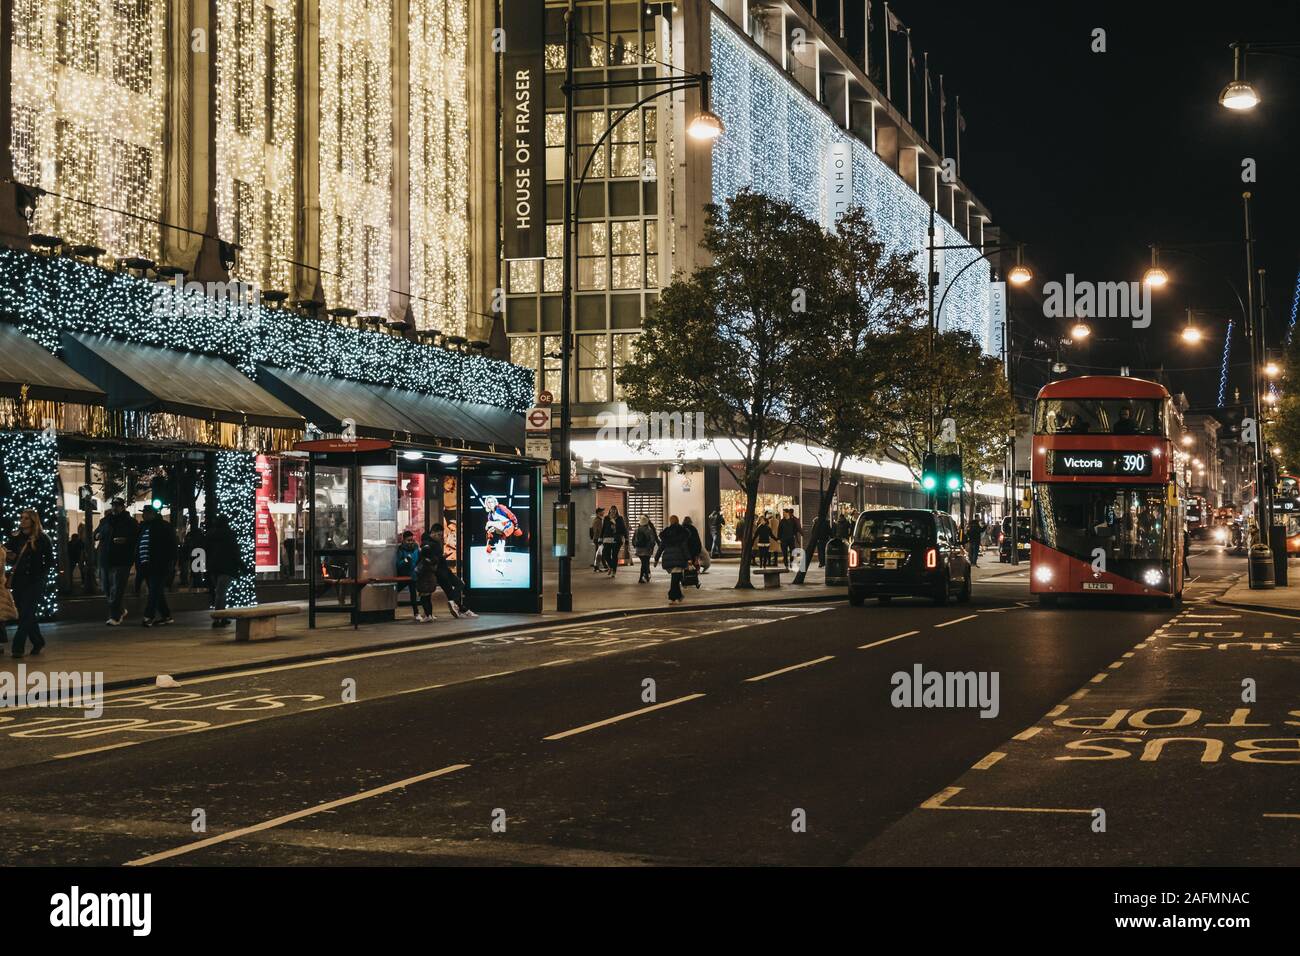 London, UK - November 17, 2019: Taxi and bus on Oxford Street in from of House of Fraser and John Lewis malls decorated with Christmas lights. Oxford Stock Photo